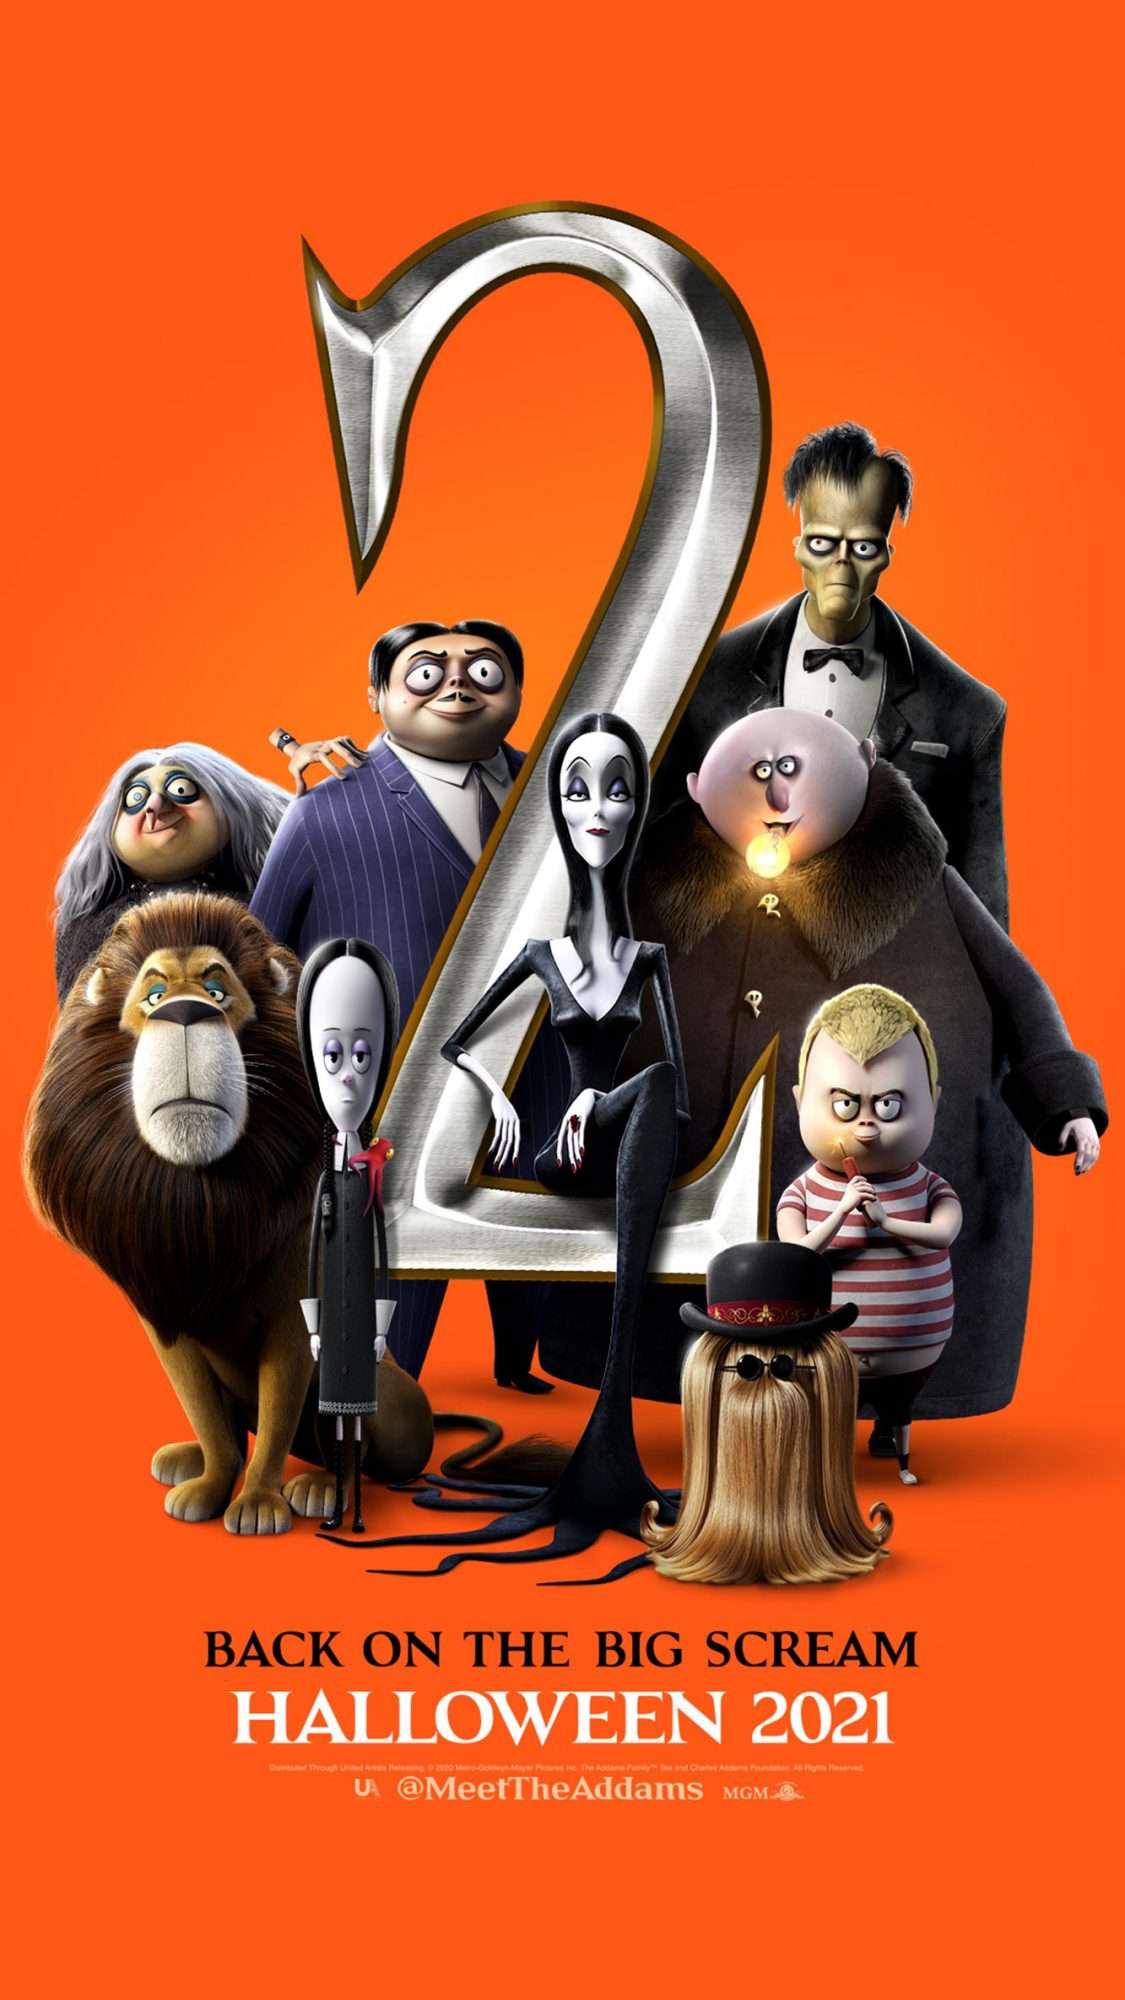 Addams Family 2 animated sequel set for Halloween 2021 